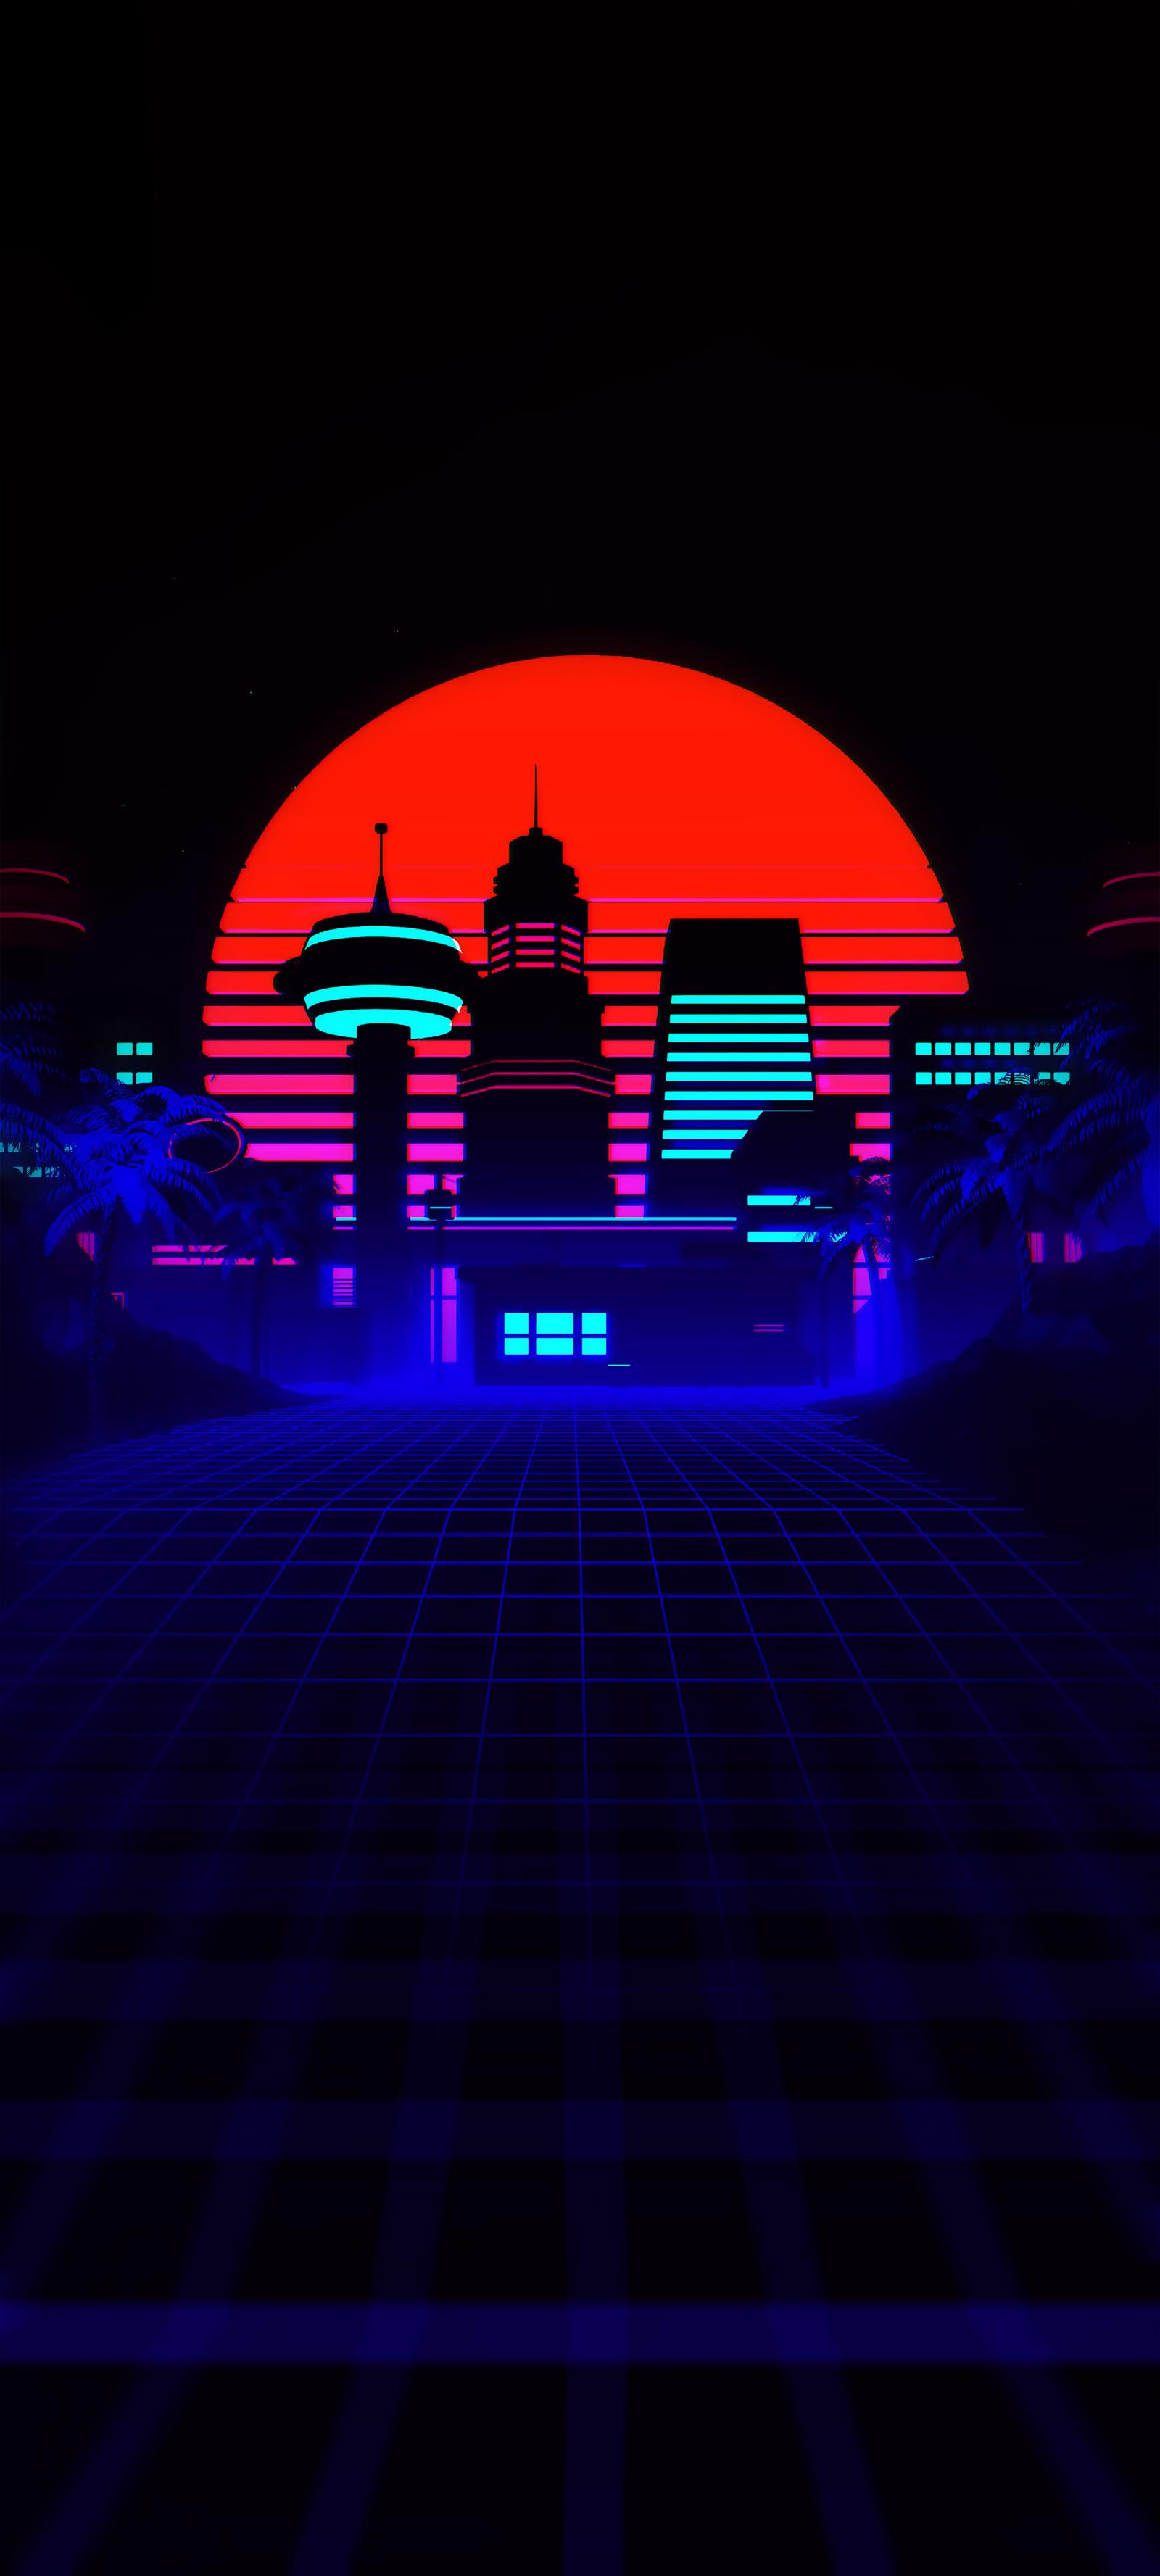 Black Wallpaper For iPhone In 4k Retro Futuristic Synthwave 80s Vibe